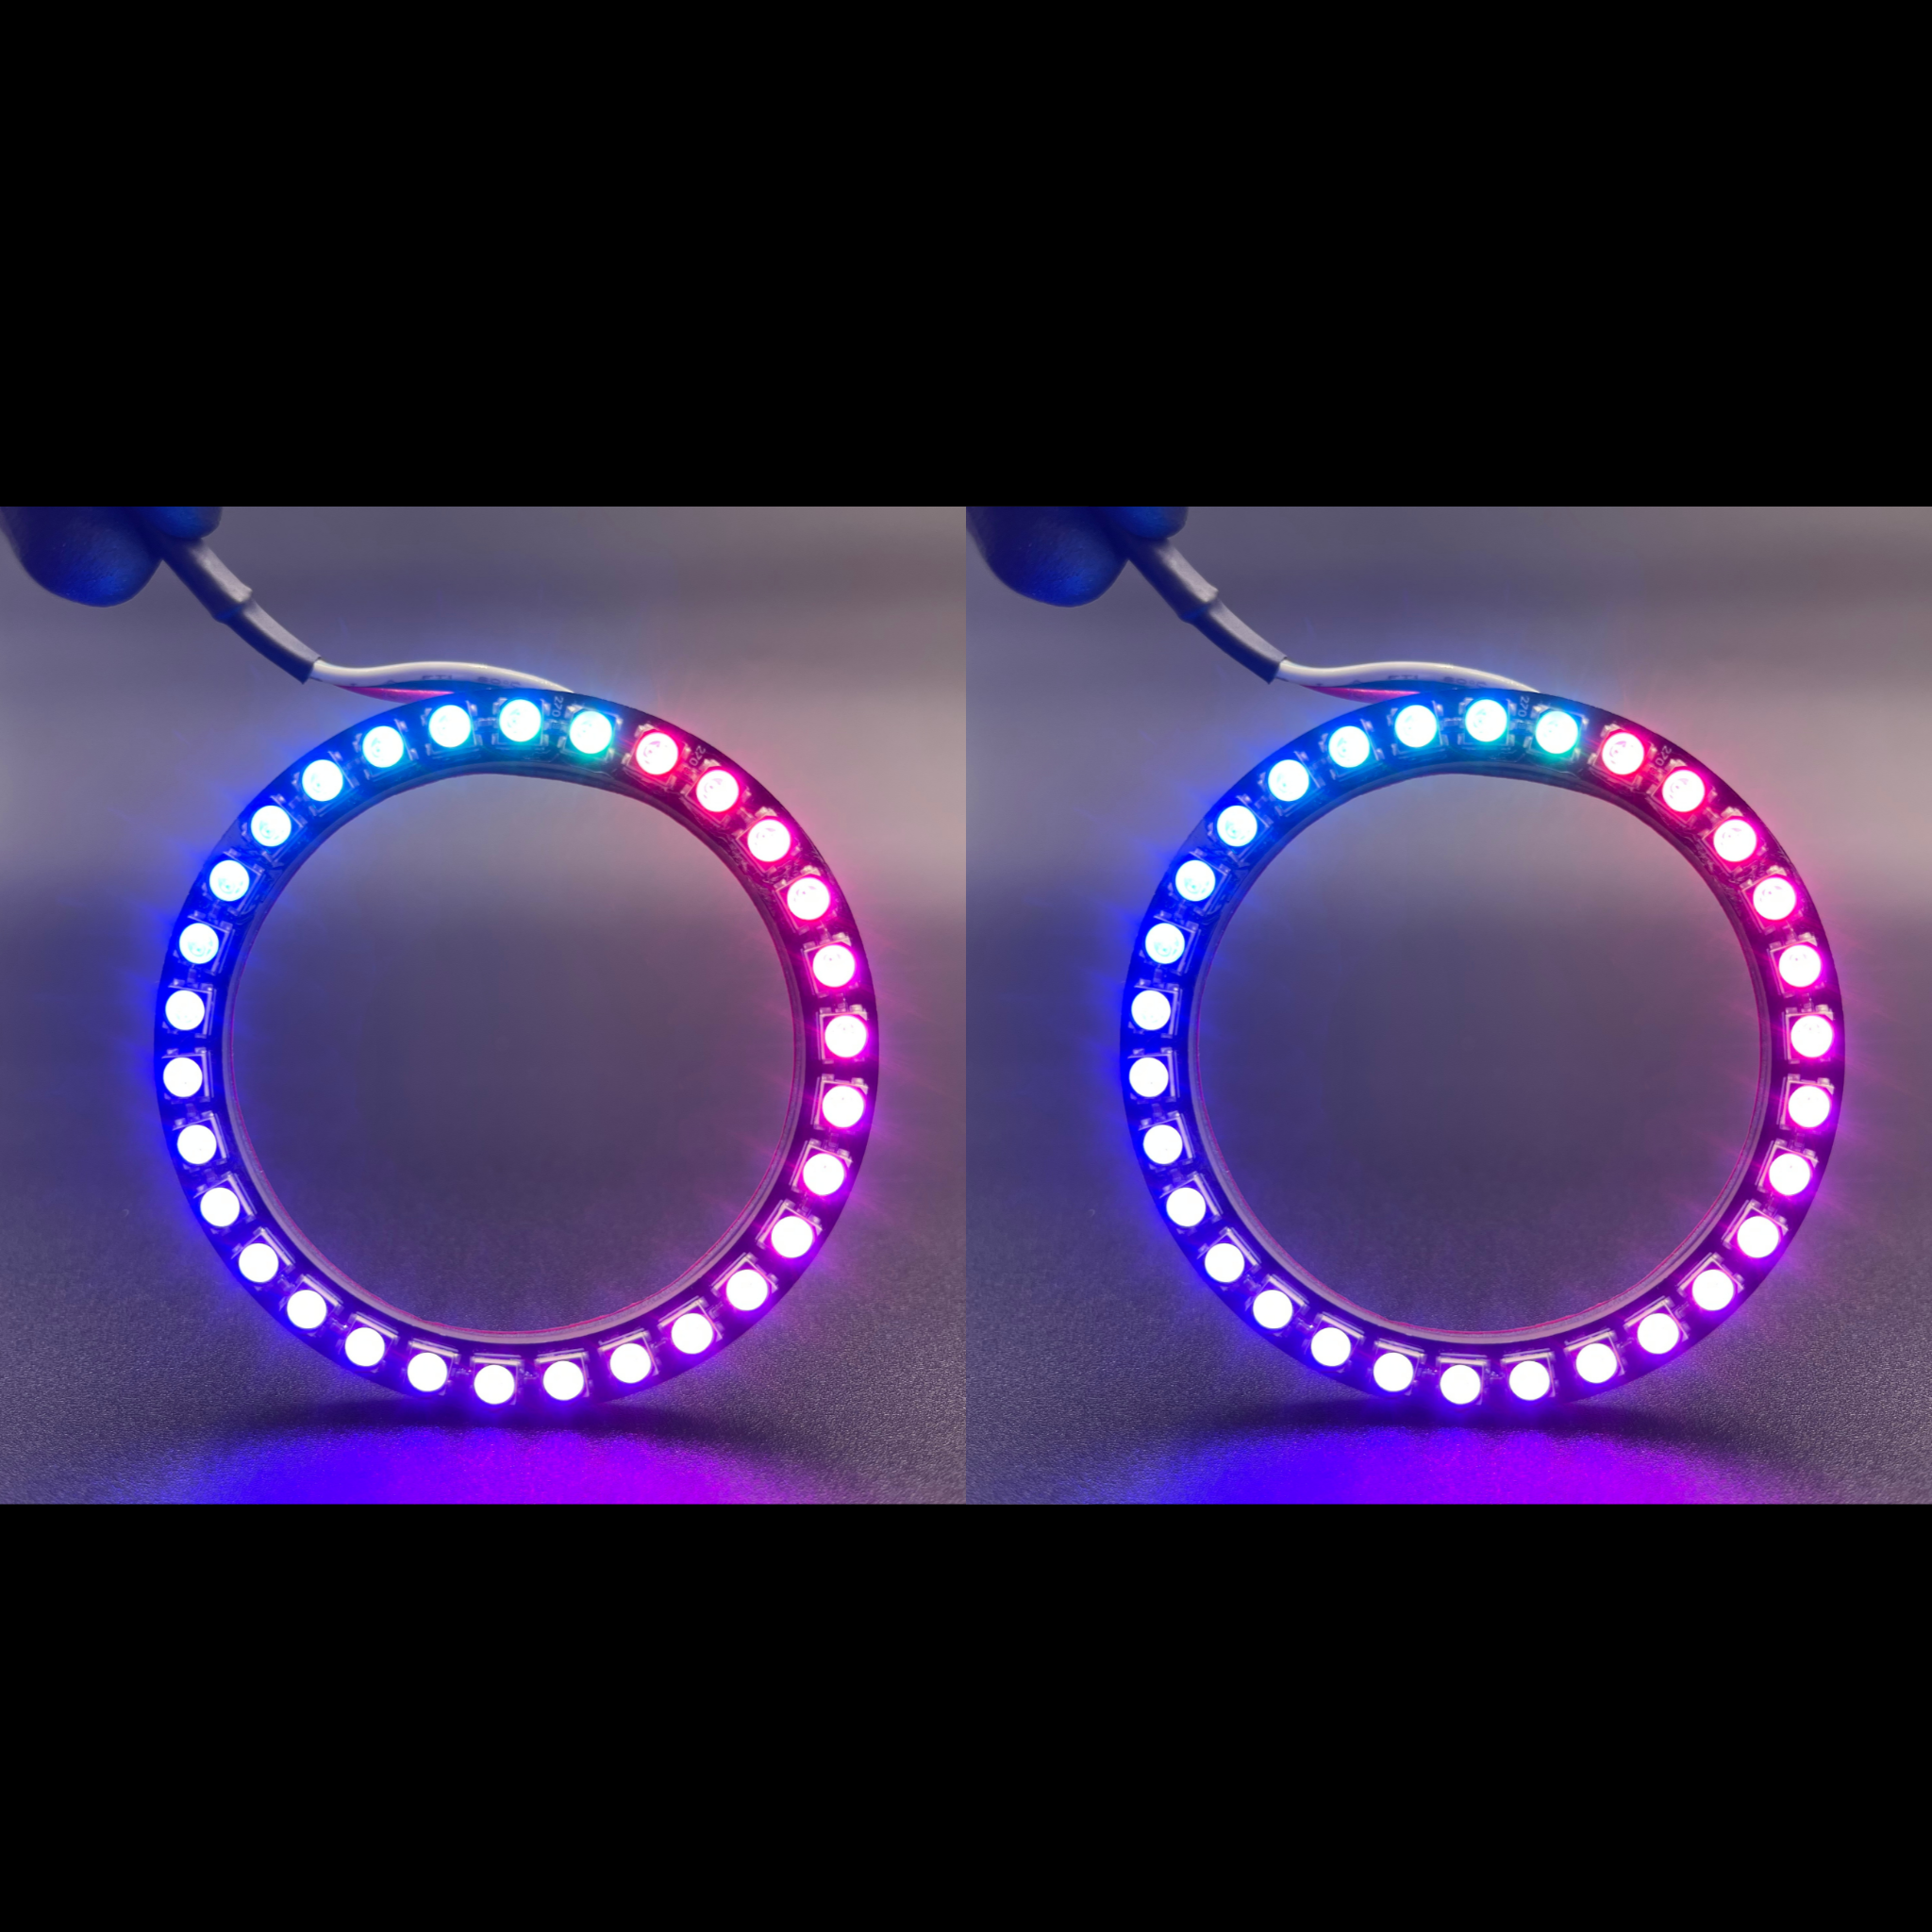 1999-2004 Ford Super Duty Multicolor Halo Kit - RGB Halo Kits Multicolor Flow Series Color Chasing RGBWA LED headlight kit Colorshift Oracle Lighting Trendz OneUpLighting Morimoto theretrofitsource AutoLEDTech Diode Dynamics